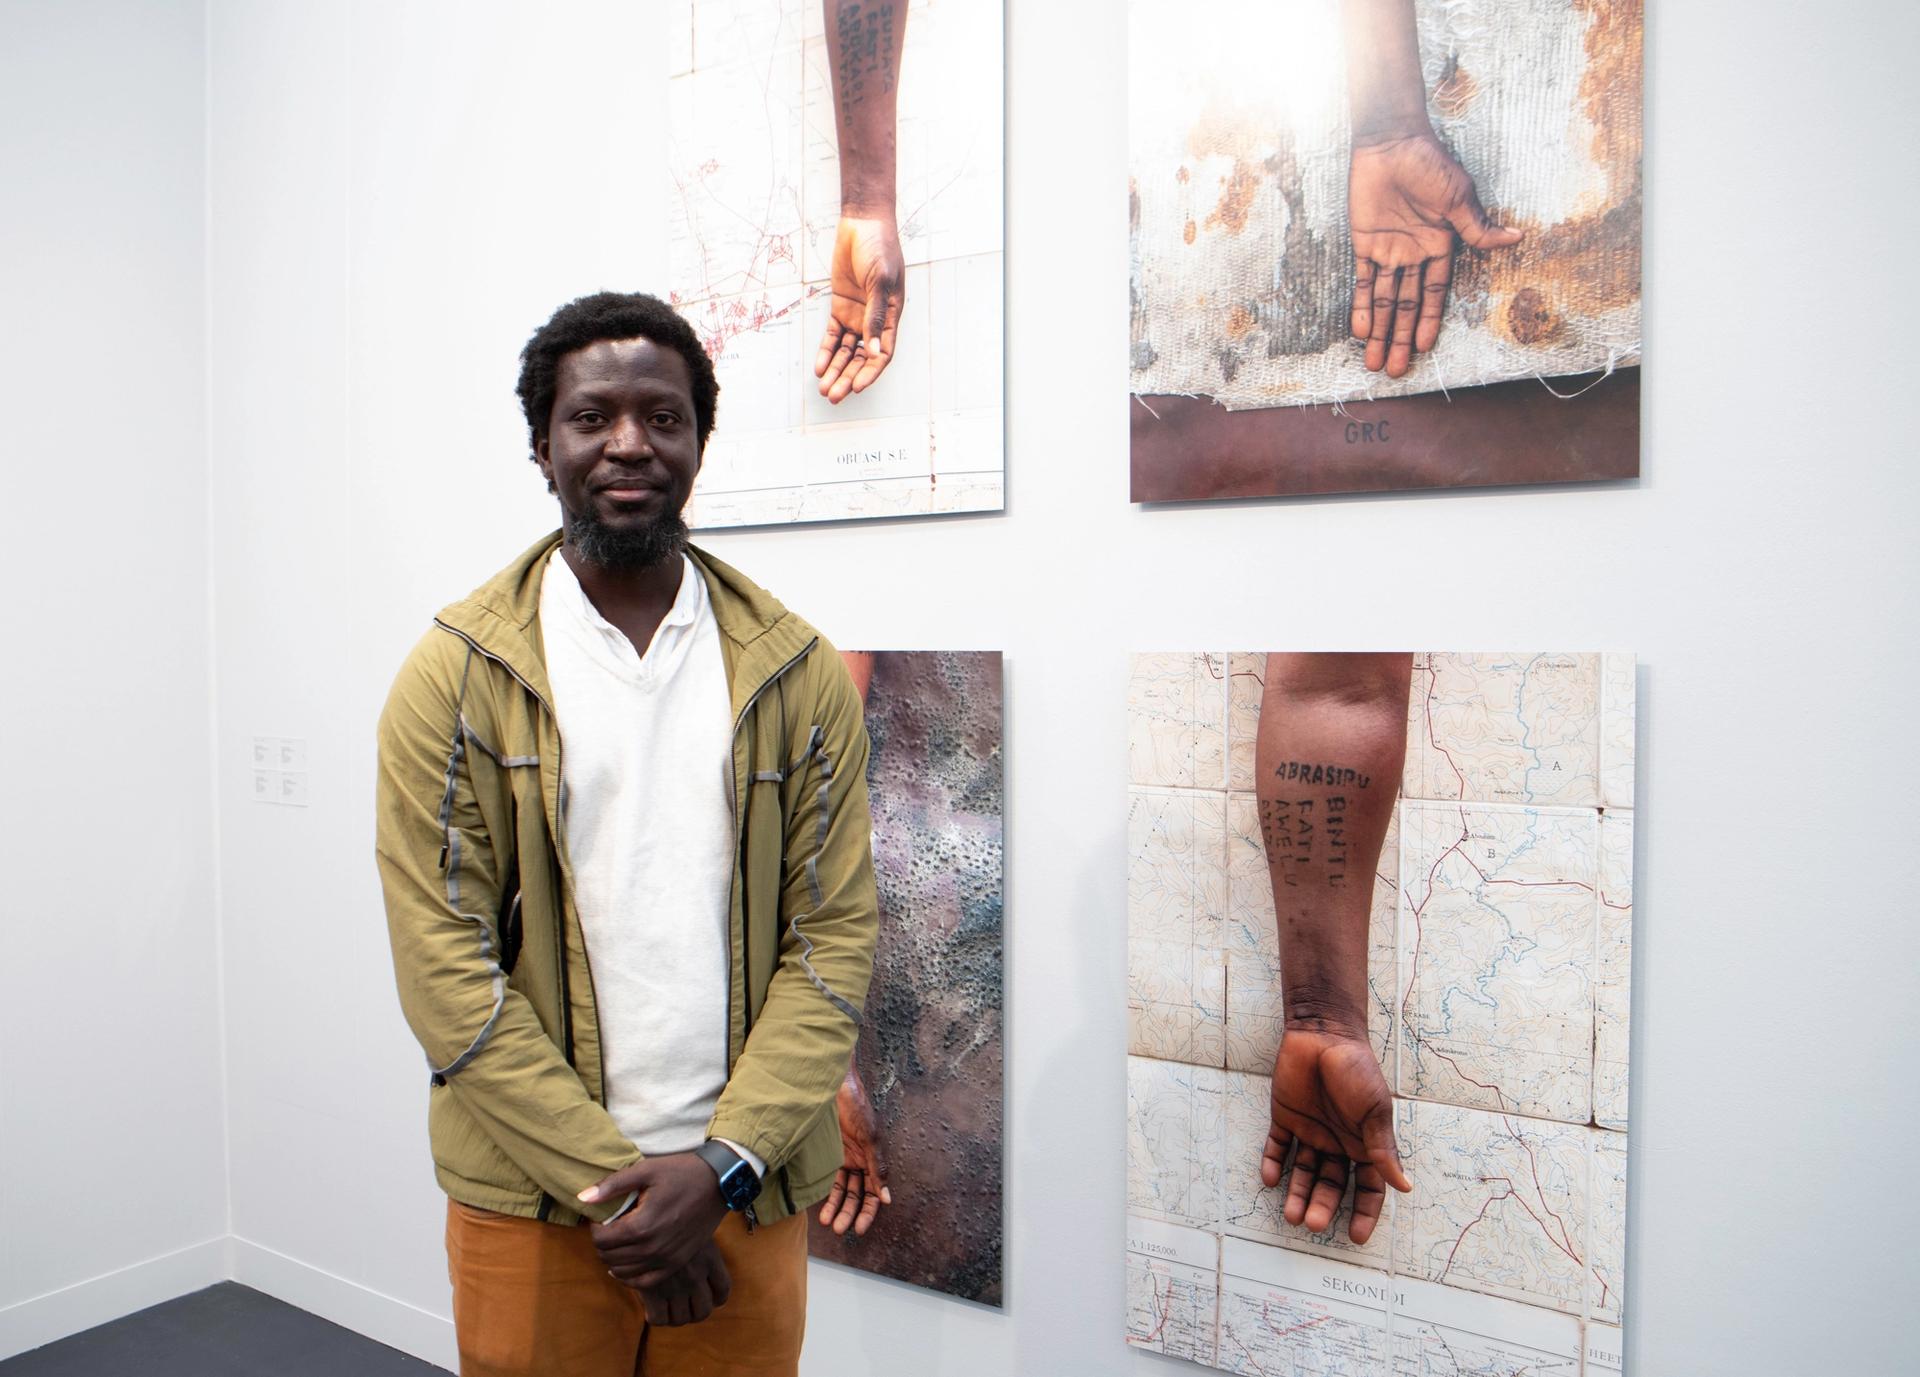 Ibrahim Mahama’s photographic C-prints will enter the collection of Norwich Castle Museum and Art Gallery Photo: © David Owens 2022